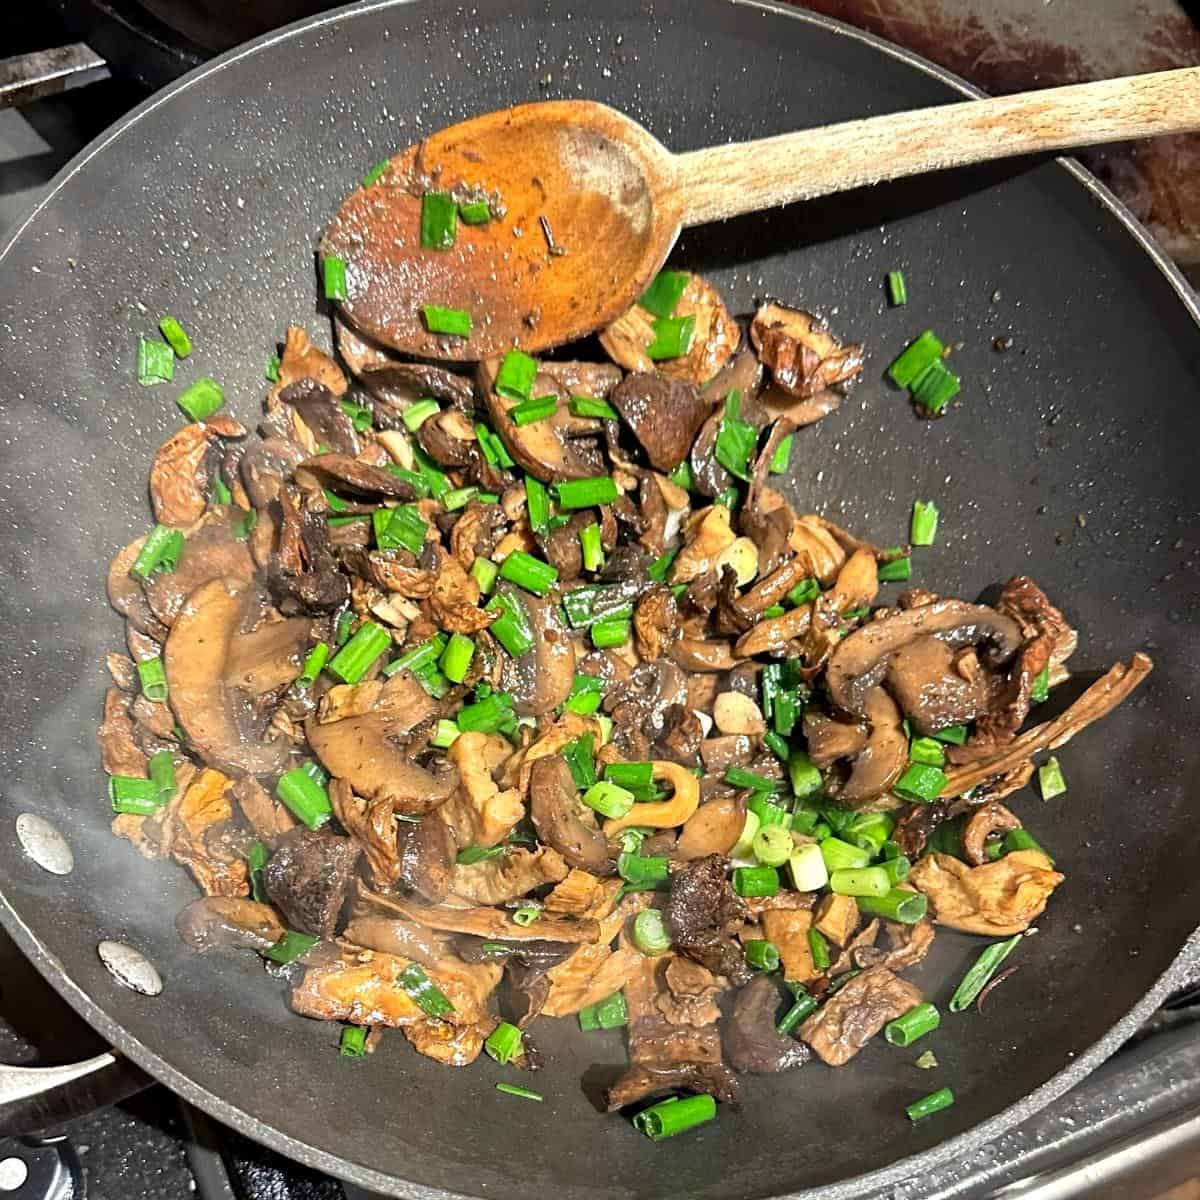 Scallions added to mushrooms in skillet or wok.